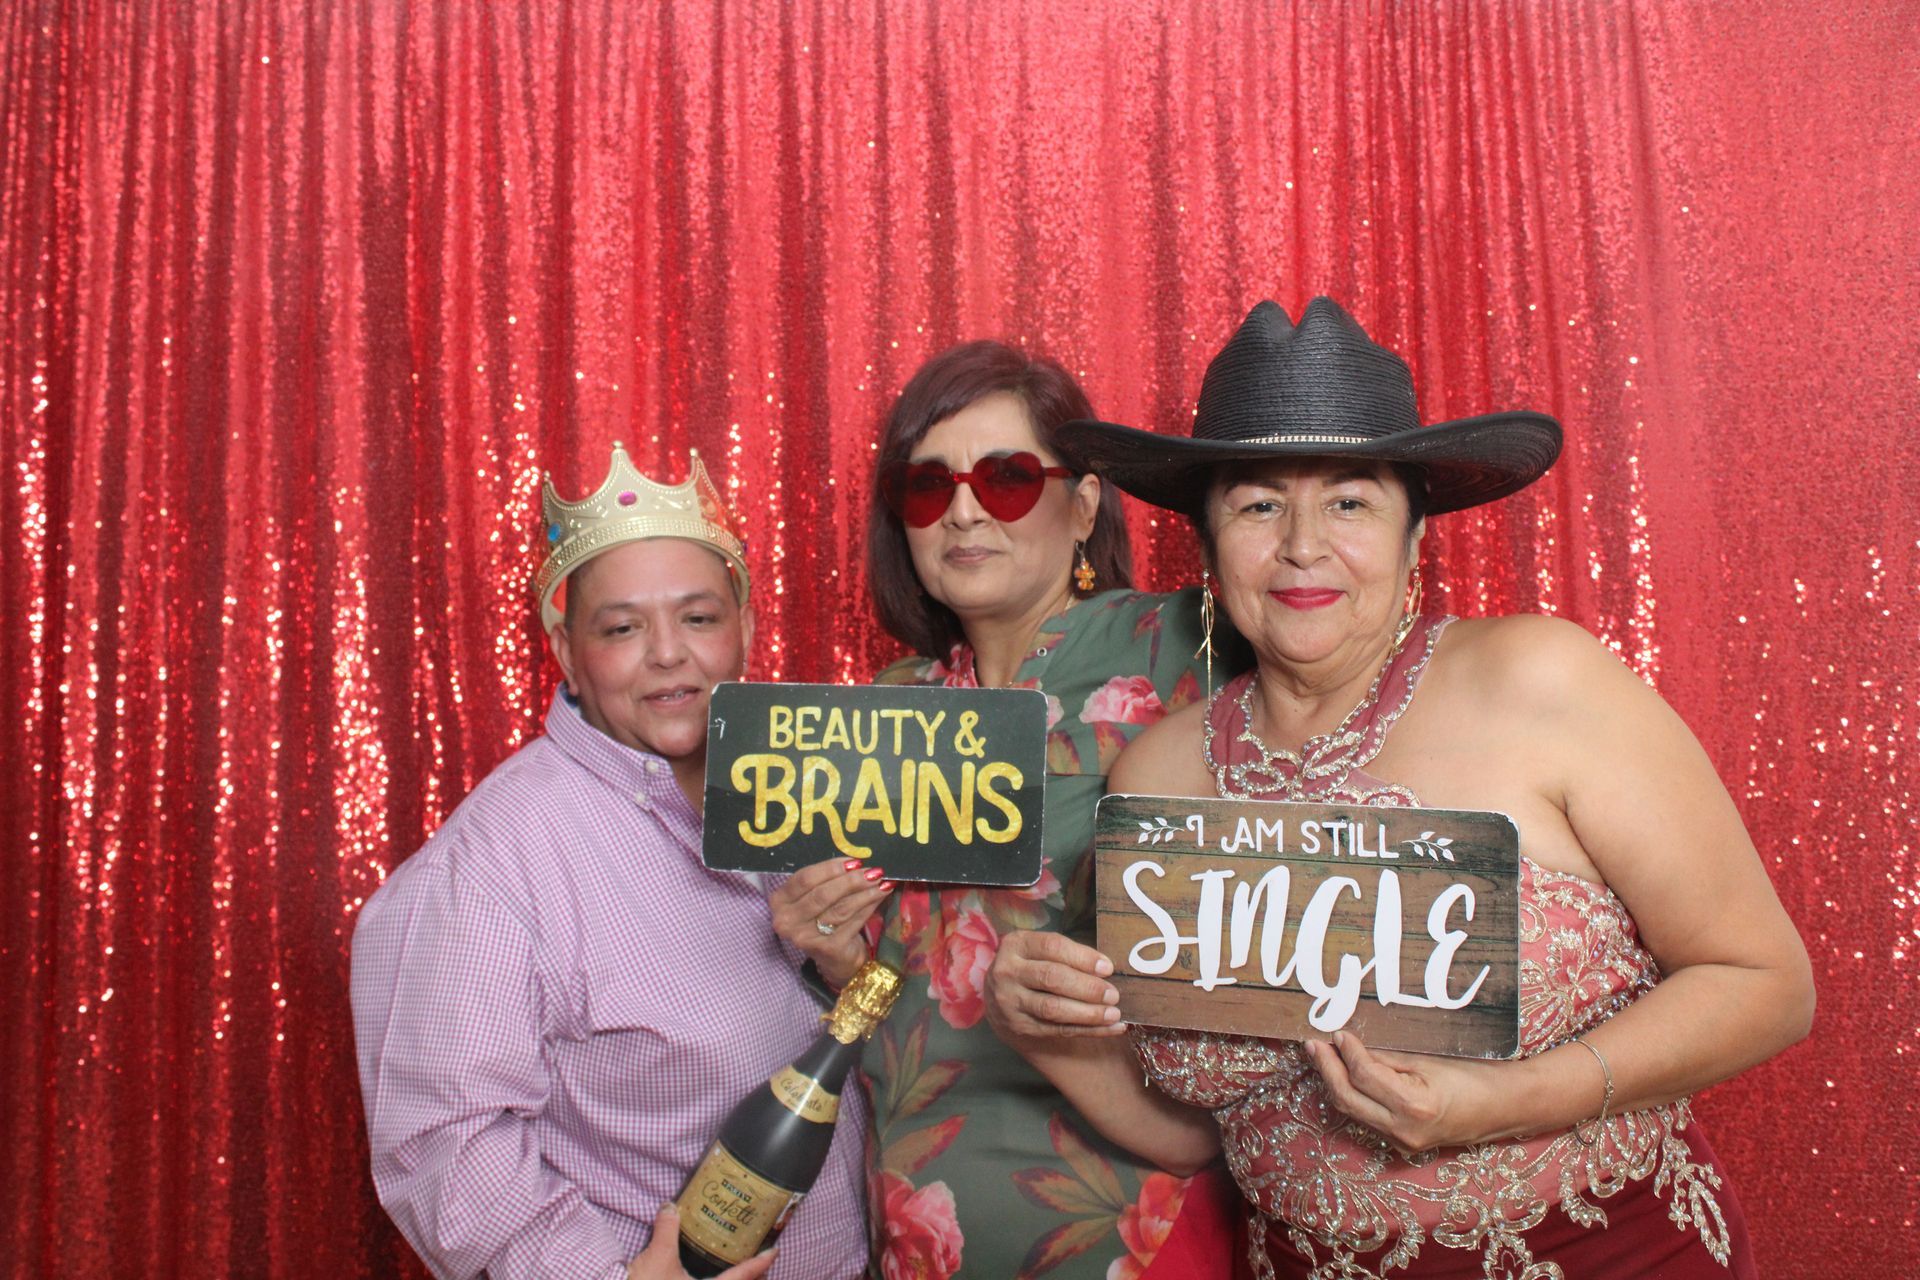 Photo props included with Frisco photo booth rentals for weddings, birthdays, corporate events & more!